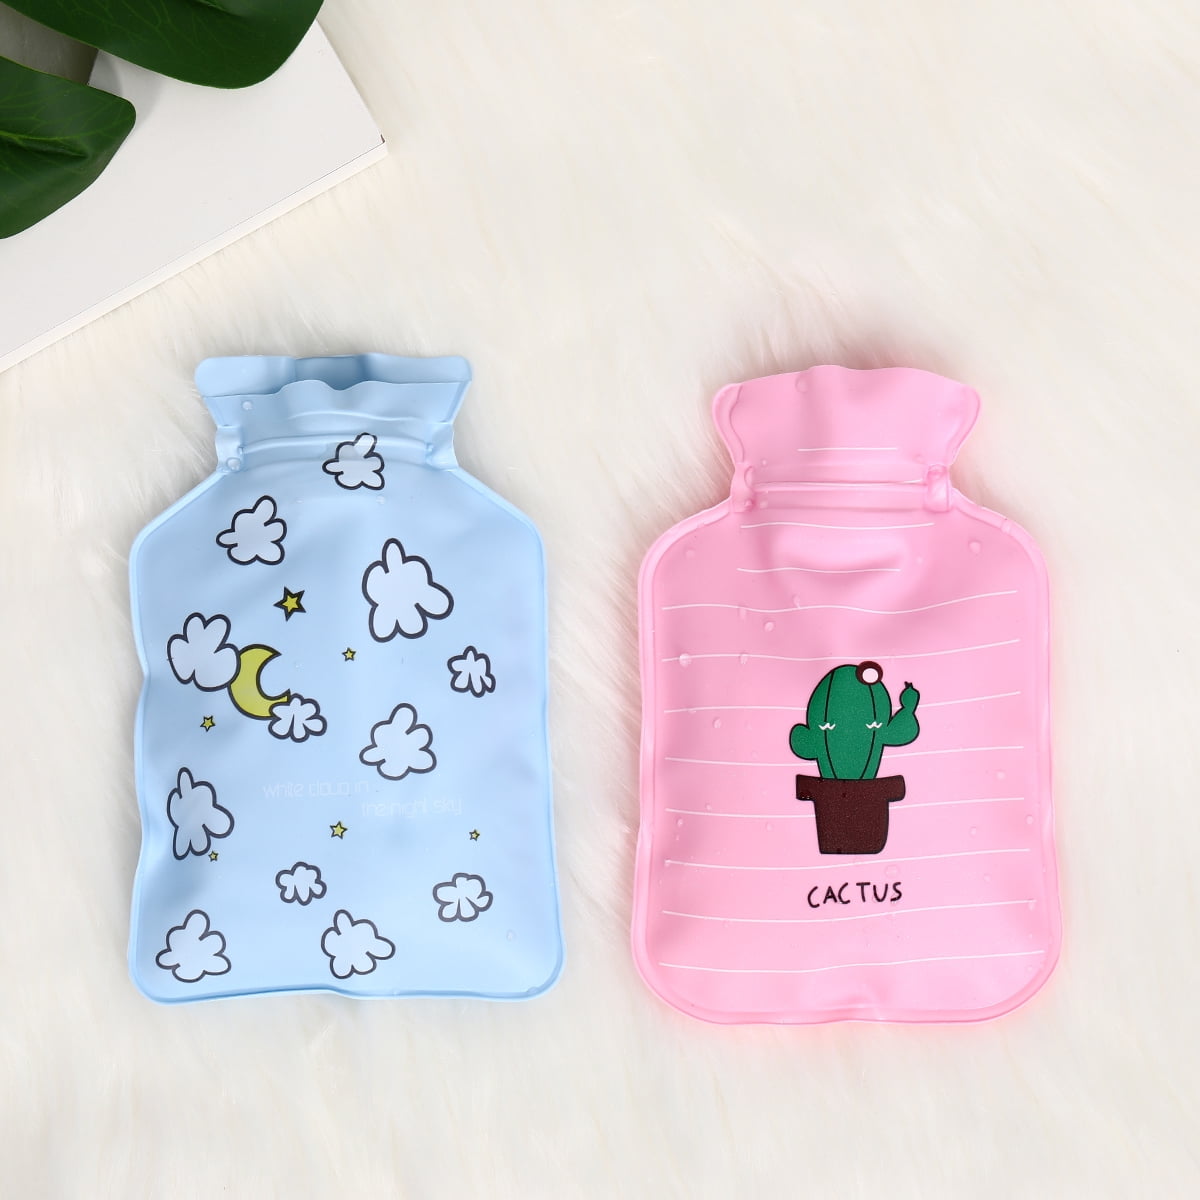 Hot Water Bottle (2 Liter), 2 Pack Hot Water Bag for Pain Relief, Menstrual  Cramps, Neck and Shoulders, Hot Cold Pack for Hot and Cold Therapy and Feet  Warmer,Silicone Hot Water Bottle